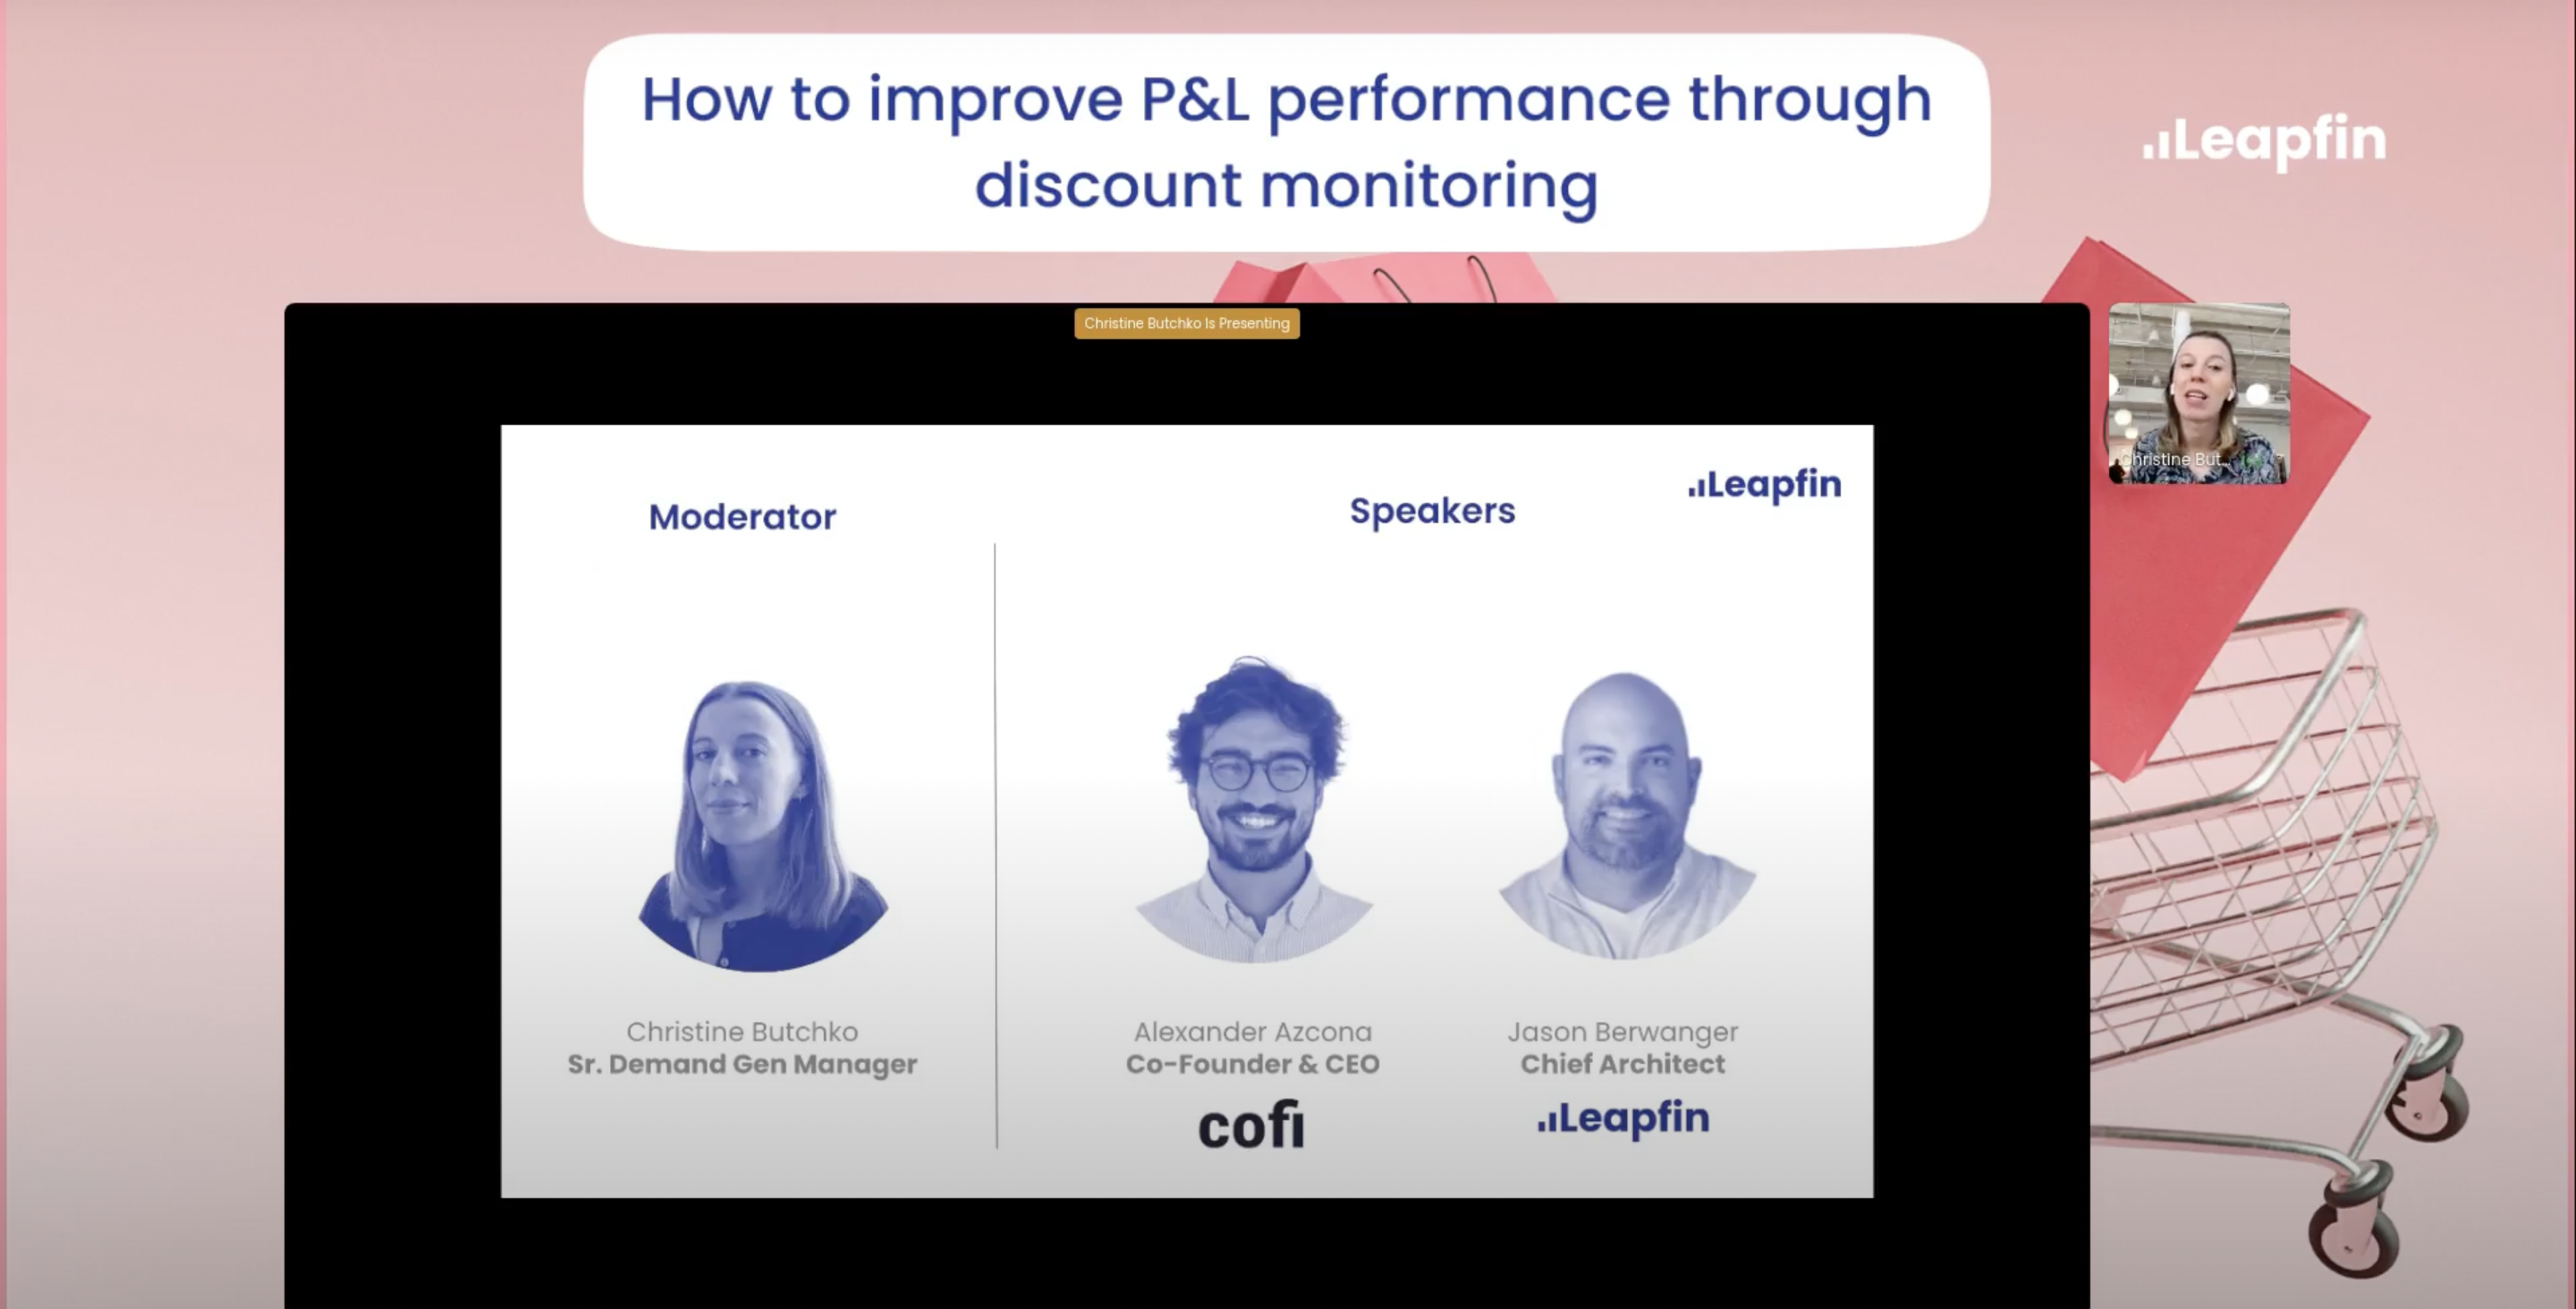 Blog post summary: How to improve P&L performance through discount monitoring